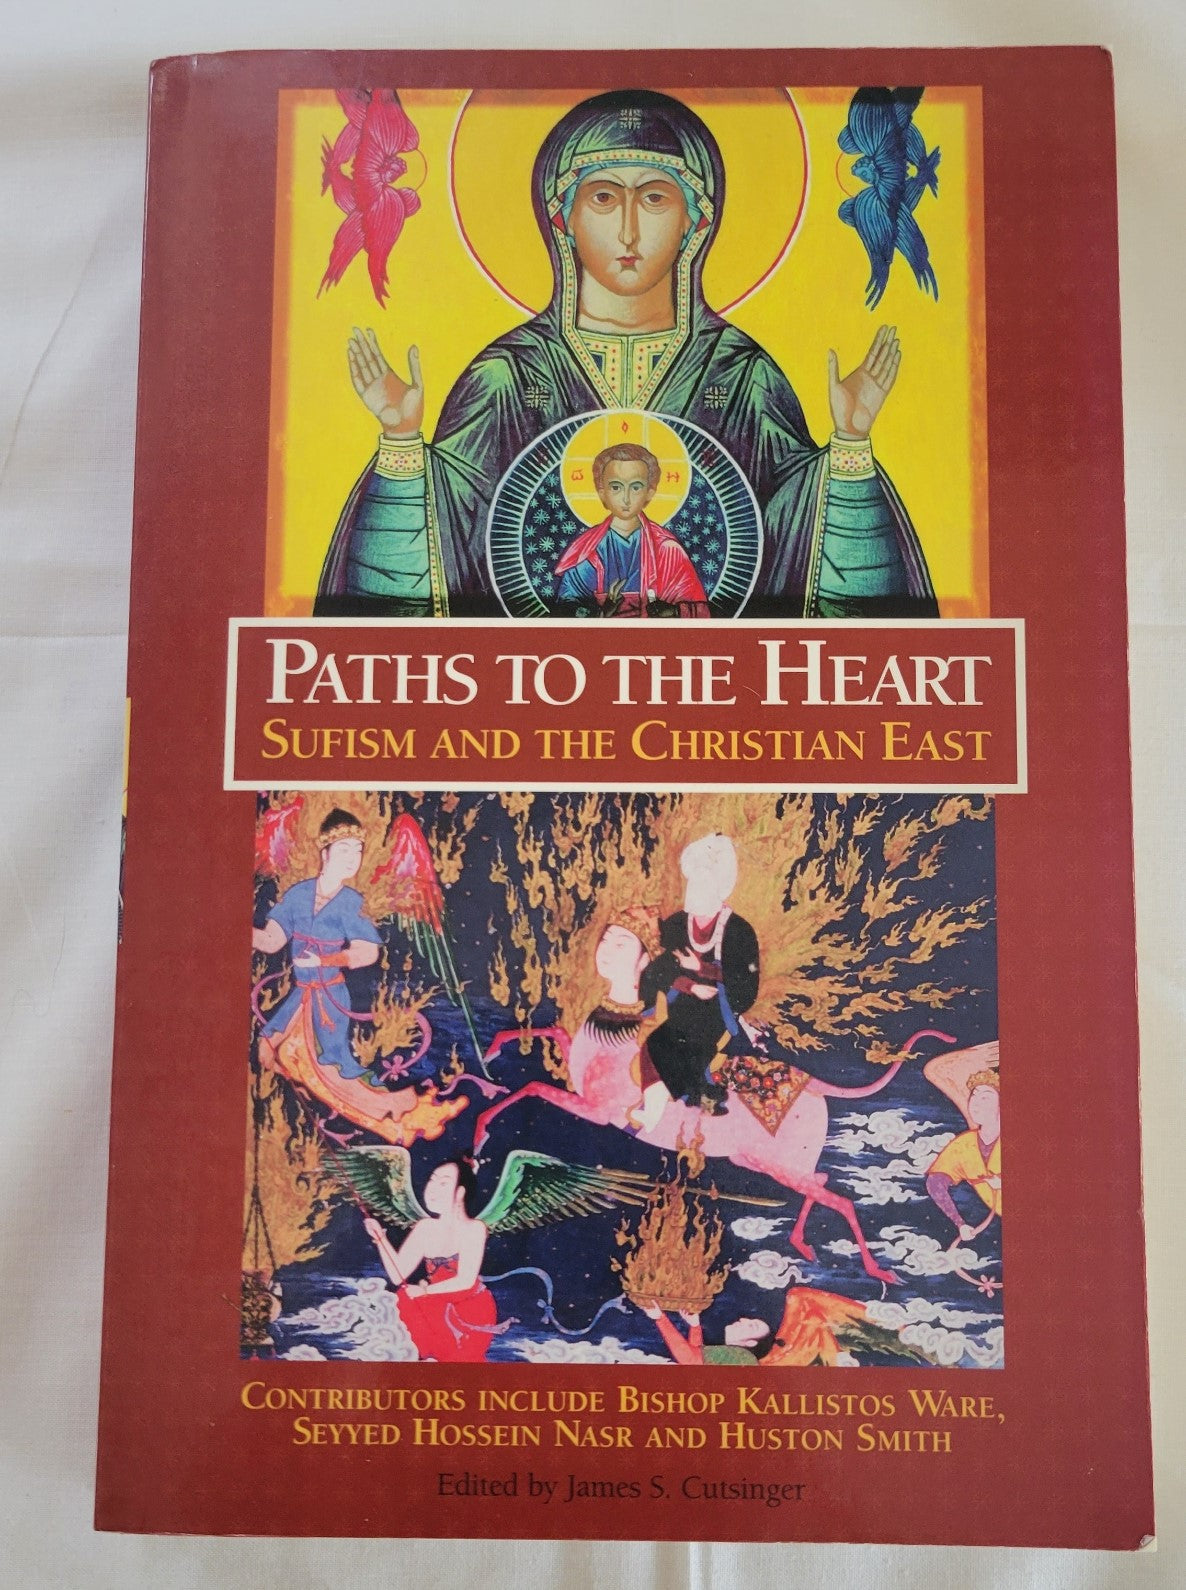 Used book for sale, " Paths to the Heart: Sufism and the Christian East” edited by James S. Cutsinger. View of front cover.